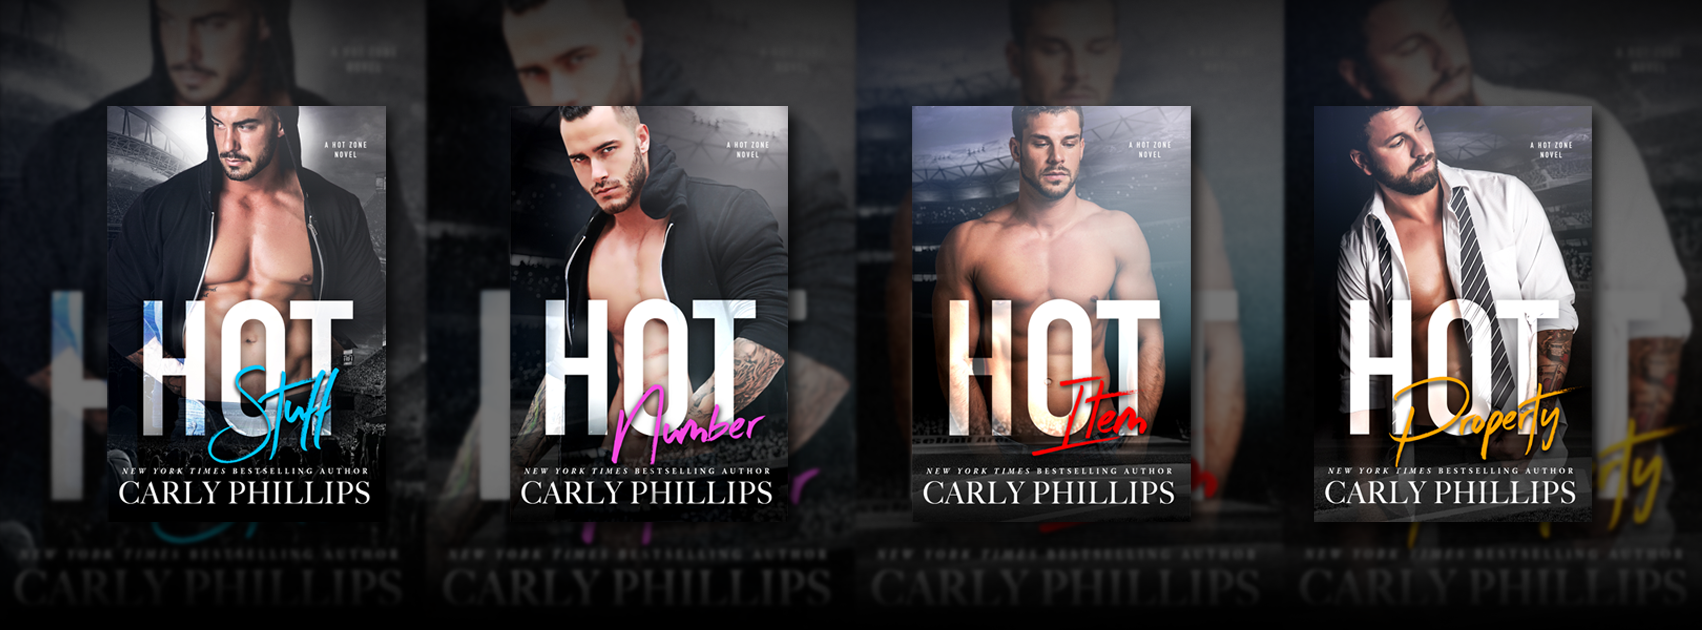 Hot Zone by Carly Phillips Cover Reveal